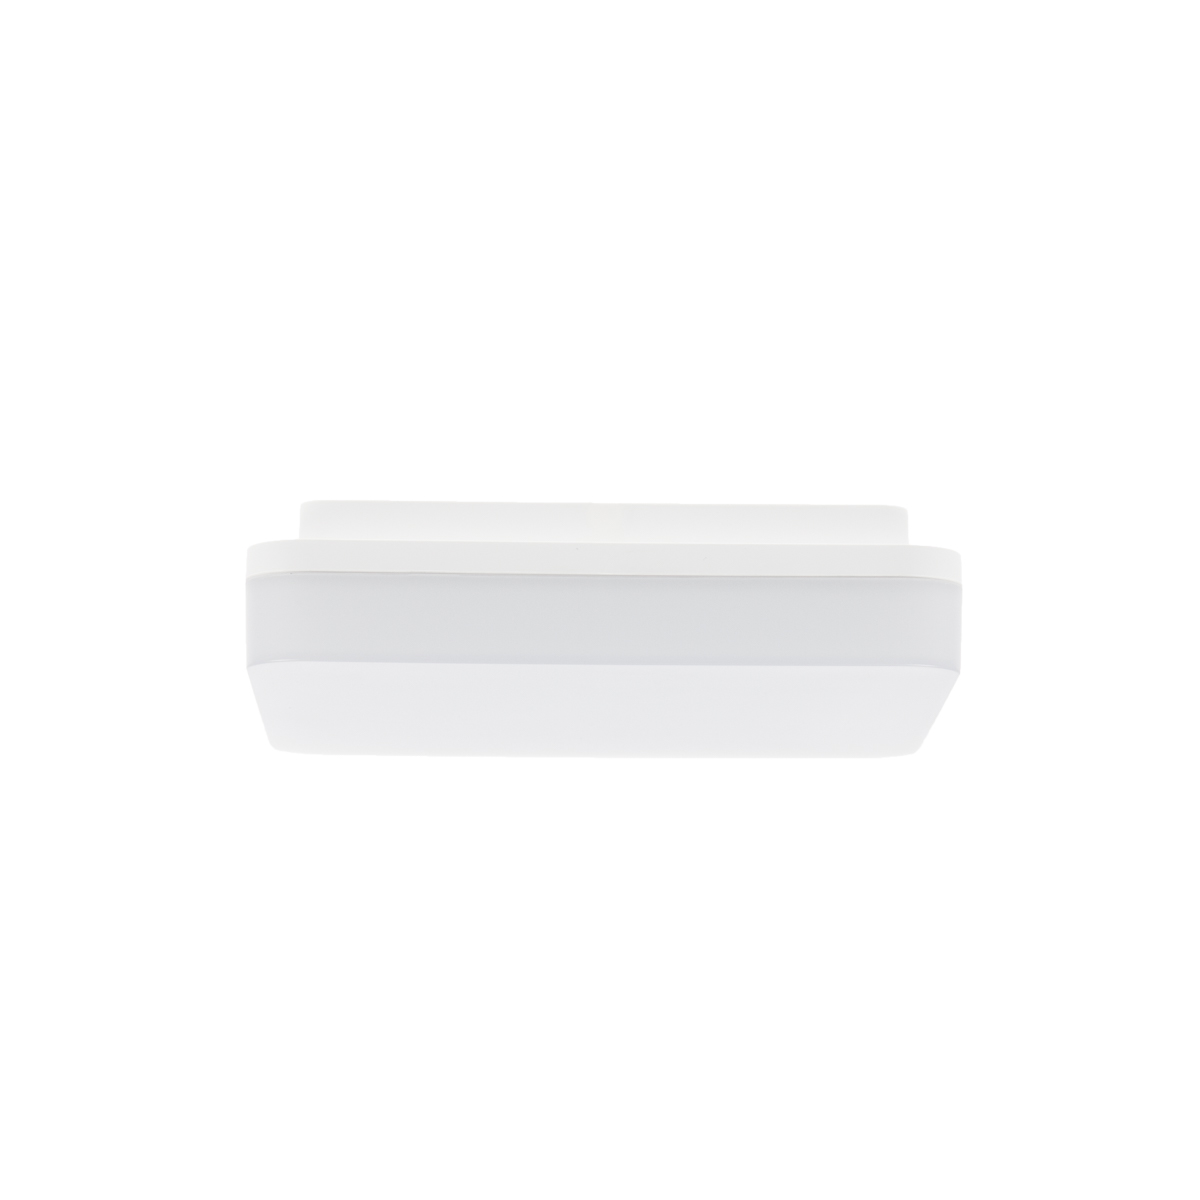 LED314 Ledeshi Slice Square Button 210mm for small rooms